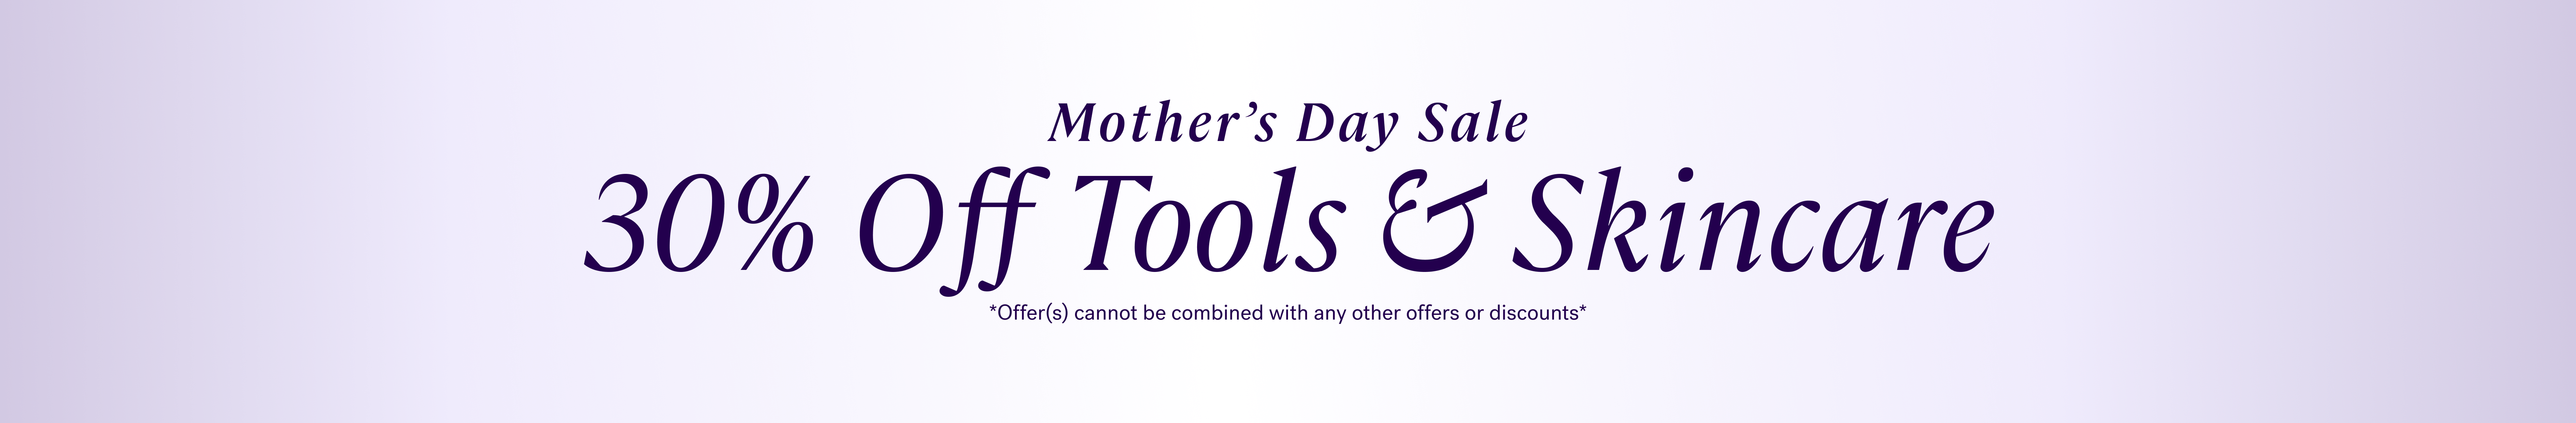 Banner for Mother's Day Sale advertising 30% off Tools & Skincare.